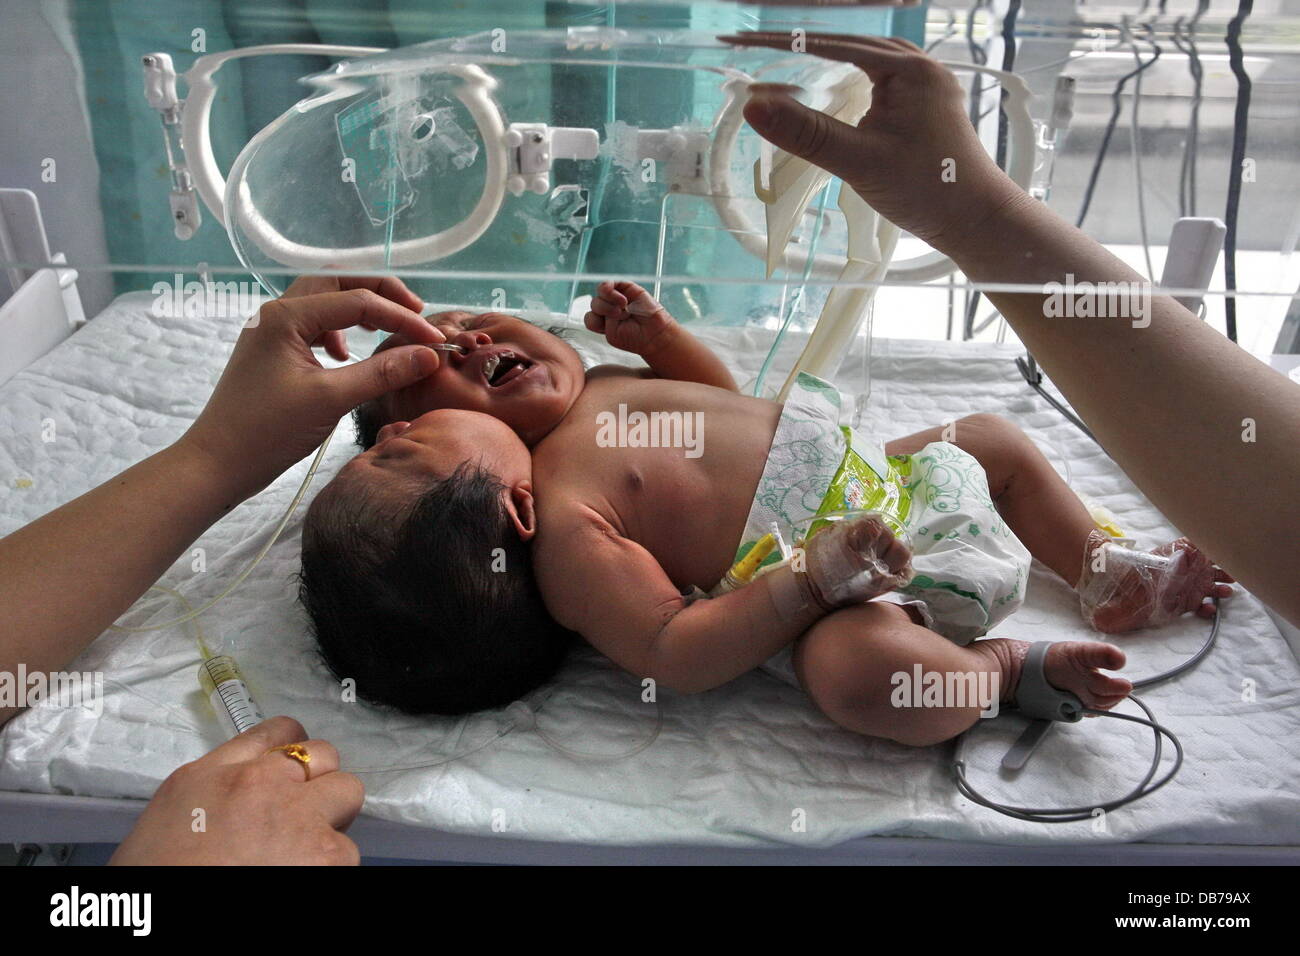 TWO HEADED BABY Conjoined female twins were born in Suining City on May 5, 2011. Two previous ultrasonic scans in September and February both revealled only a single embryo, but a final scan two days before the birth revealled that the daughter of mother Stock Photo